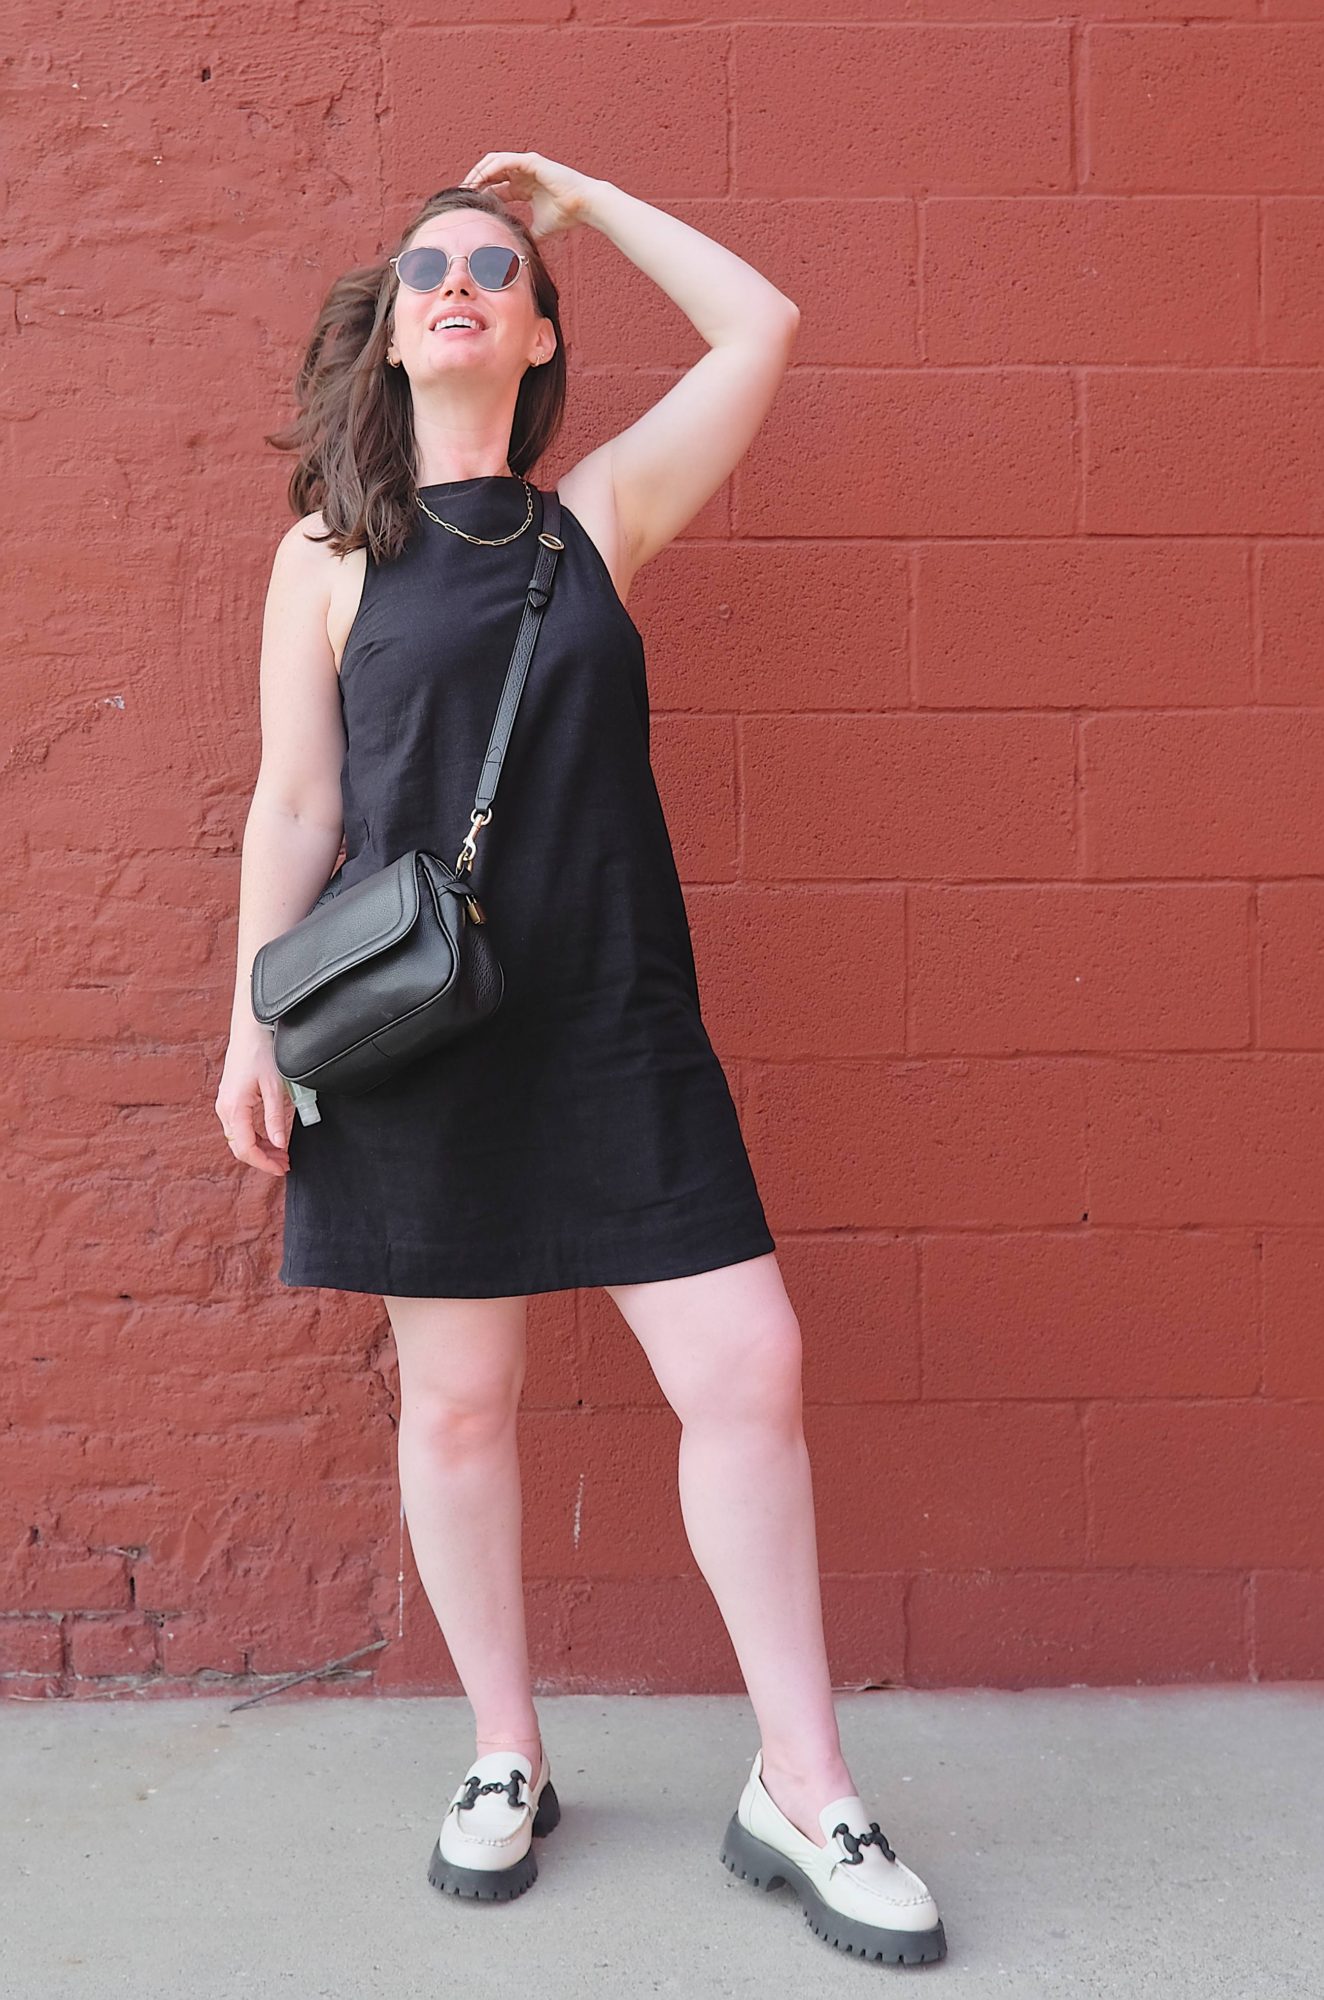 Alyssa wears a black dress and stands in front of a red wall